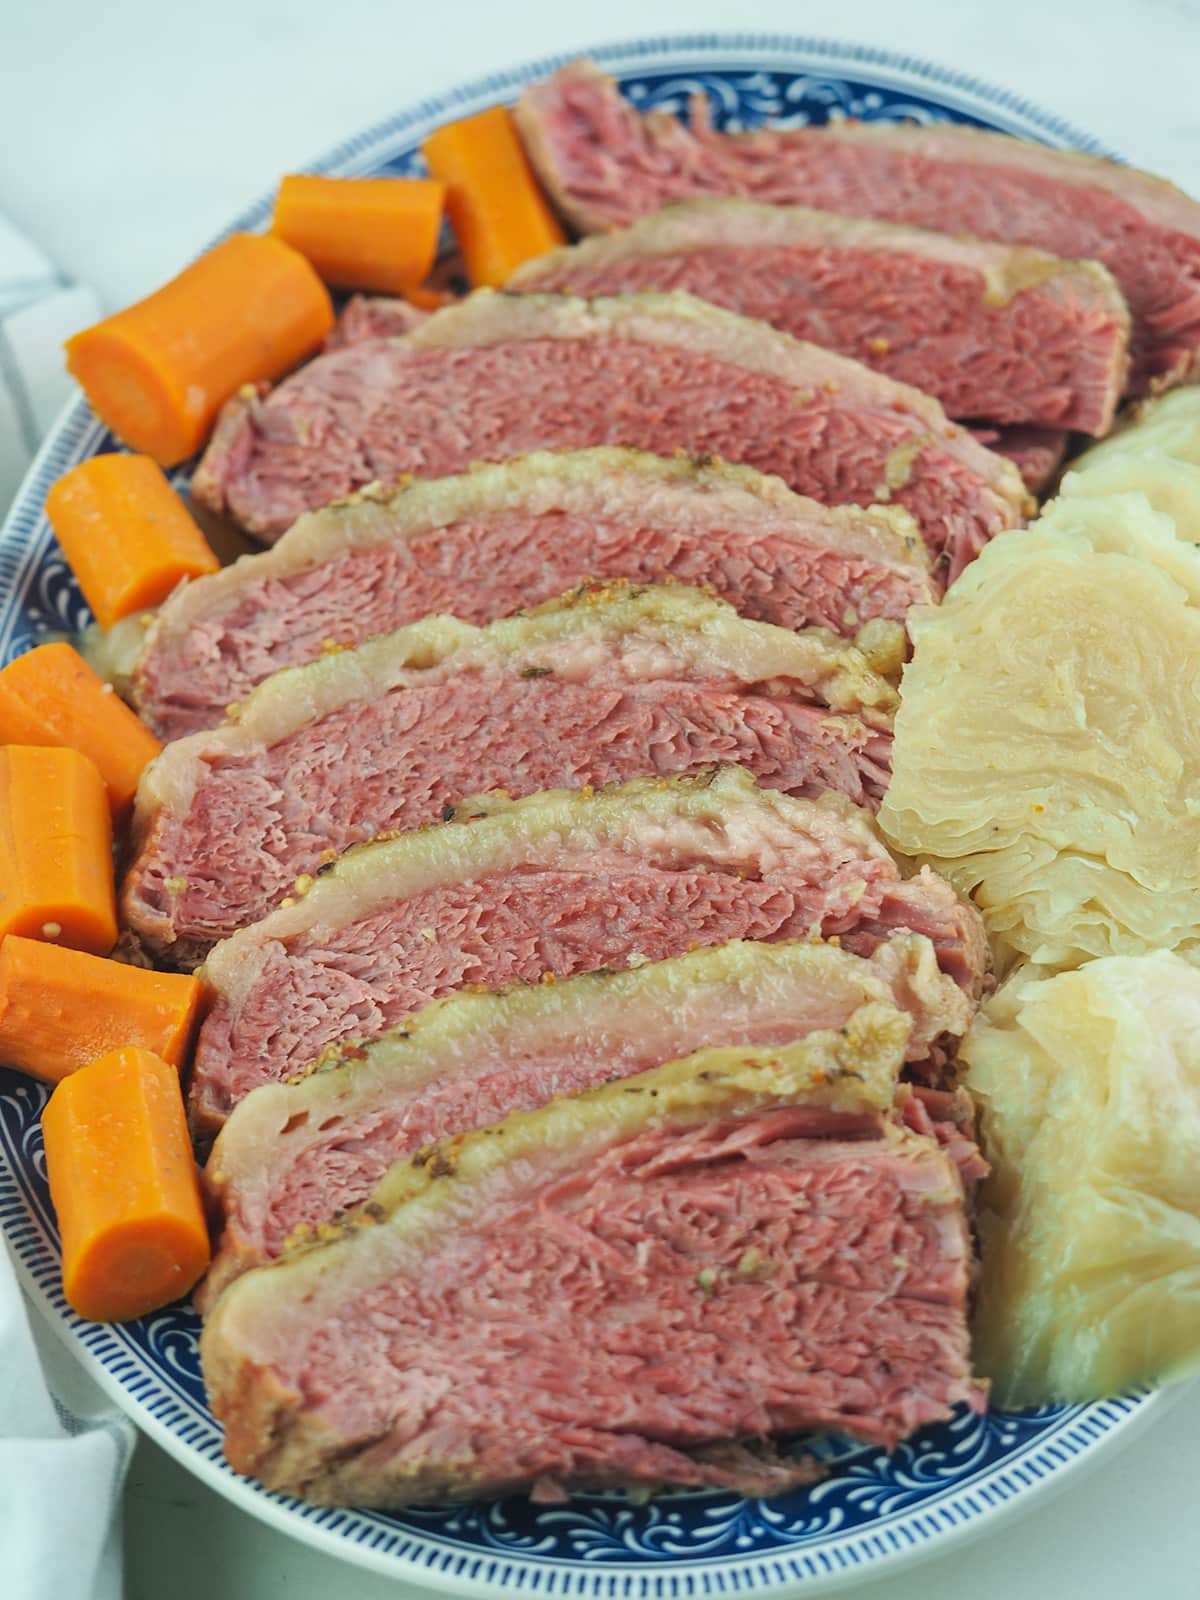 sliced corned beef on blue and white platter with cabbage and carrots